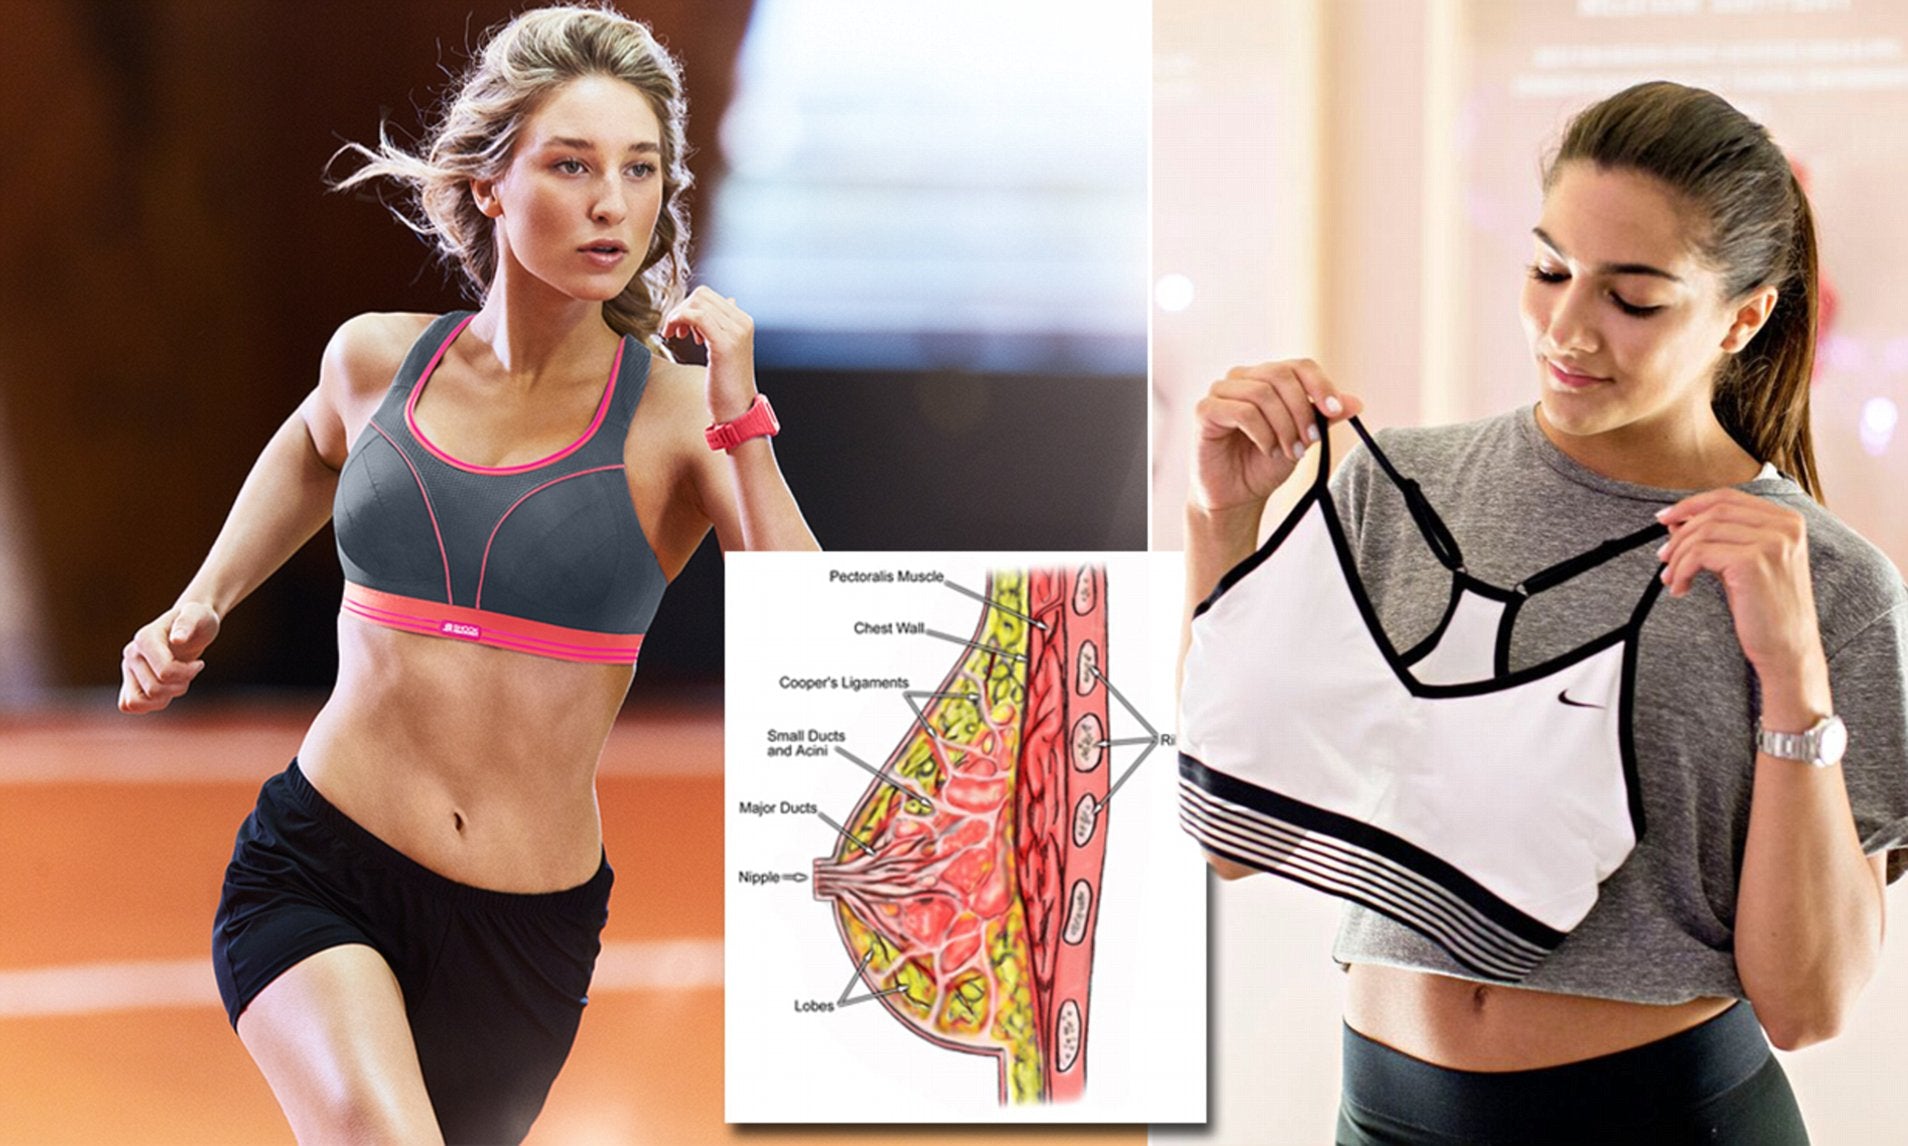 Can Sports Bra Cause Breast Lumps? – solowomen